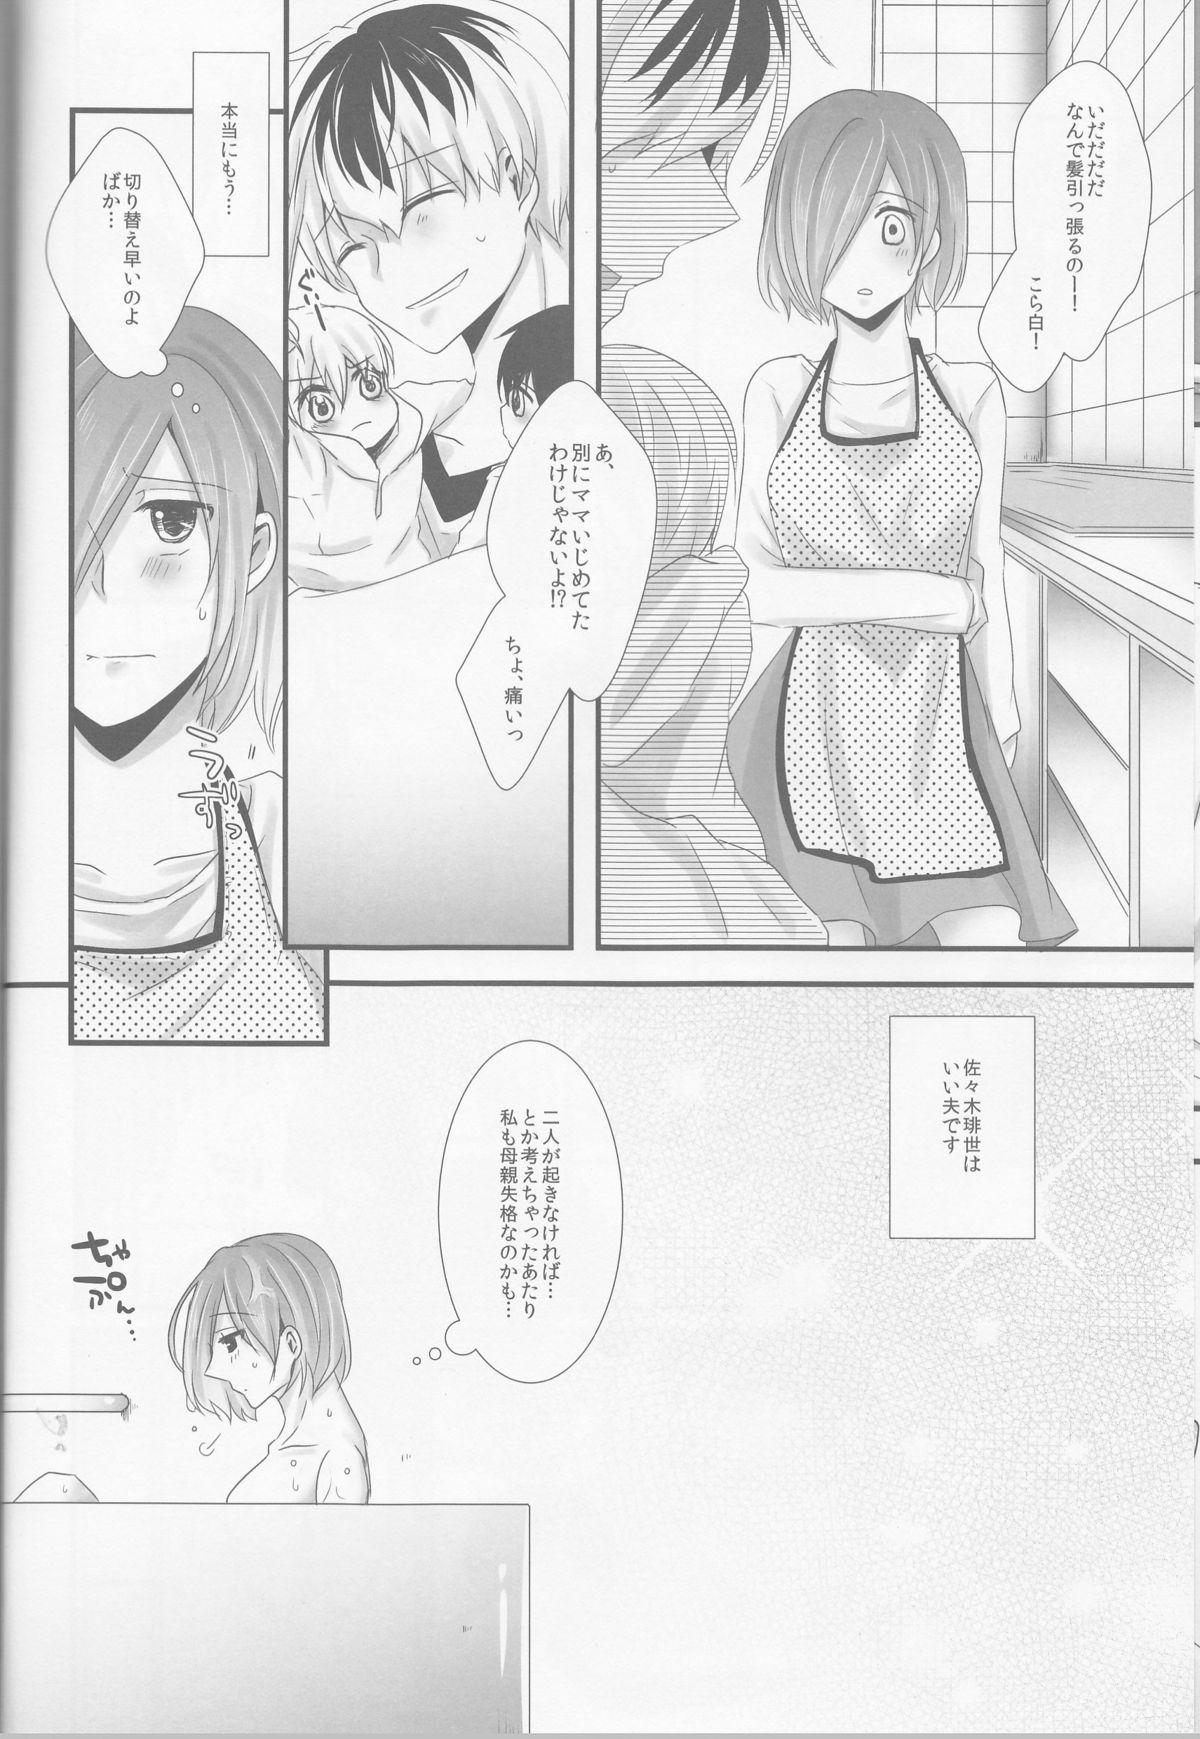 Wet Cunt Kitaru Mirai no Himitsugoto - Secret Events of the Coming Future - Tokyo ghoul Free Amateur - Page 21